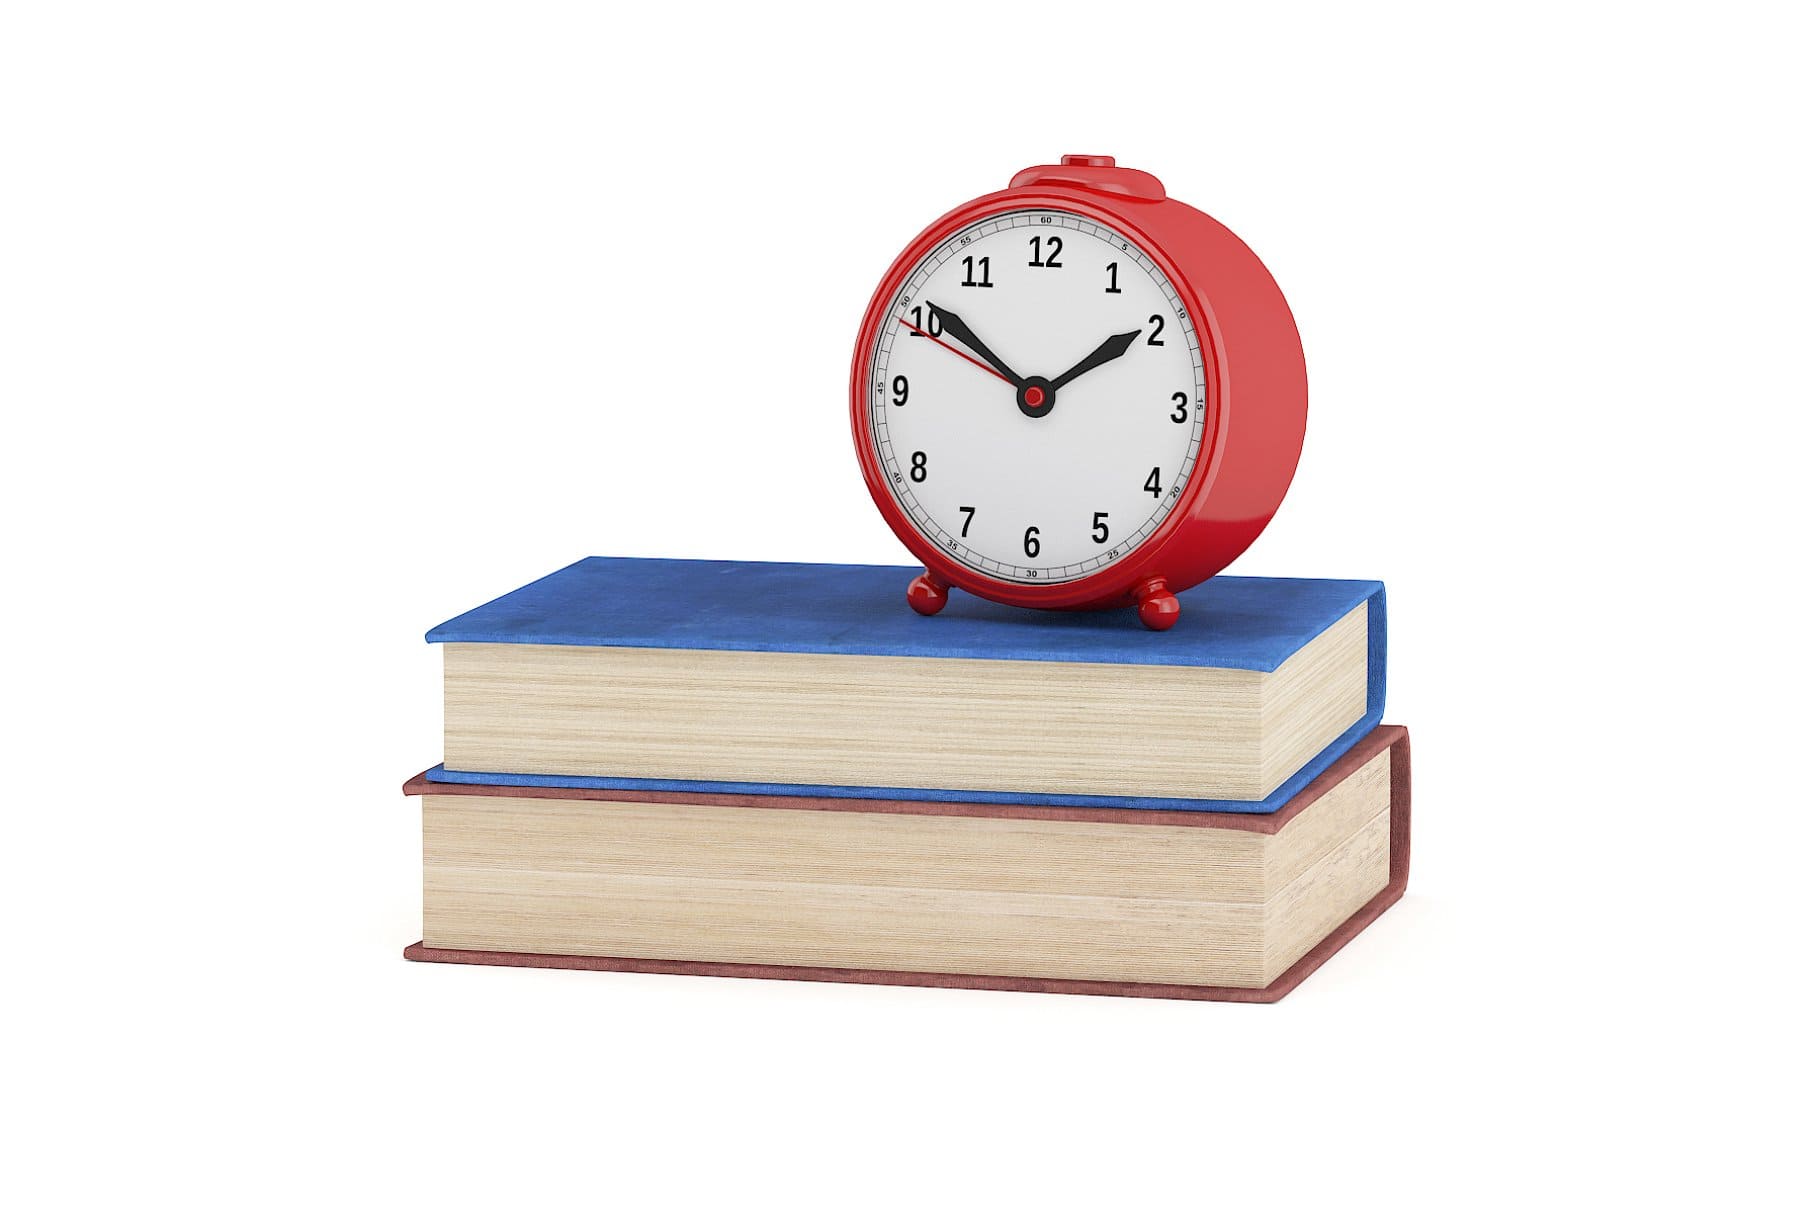 A book with a red cover, a book with a blue cover and a red watch.